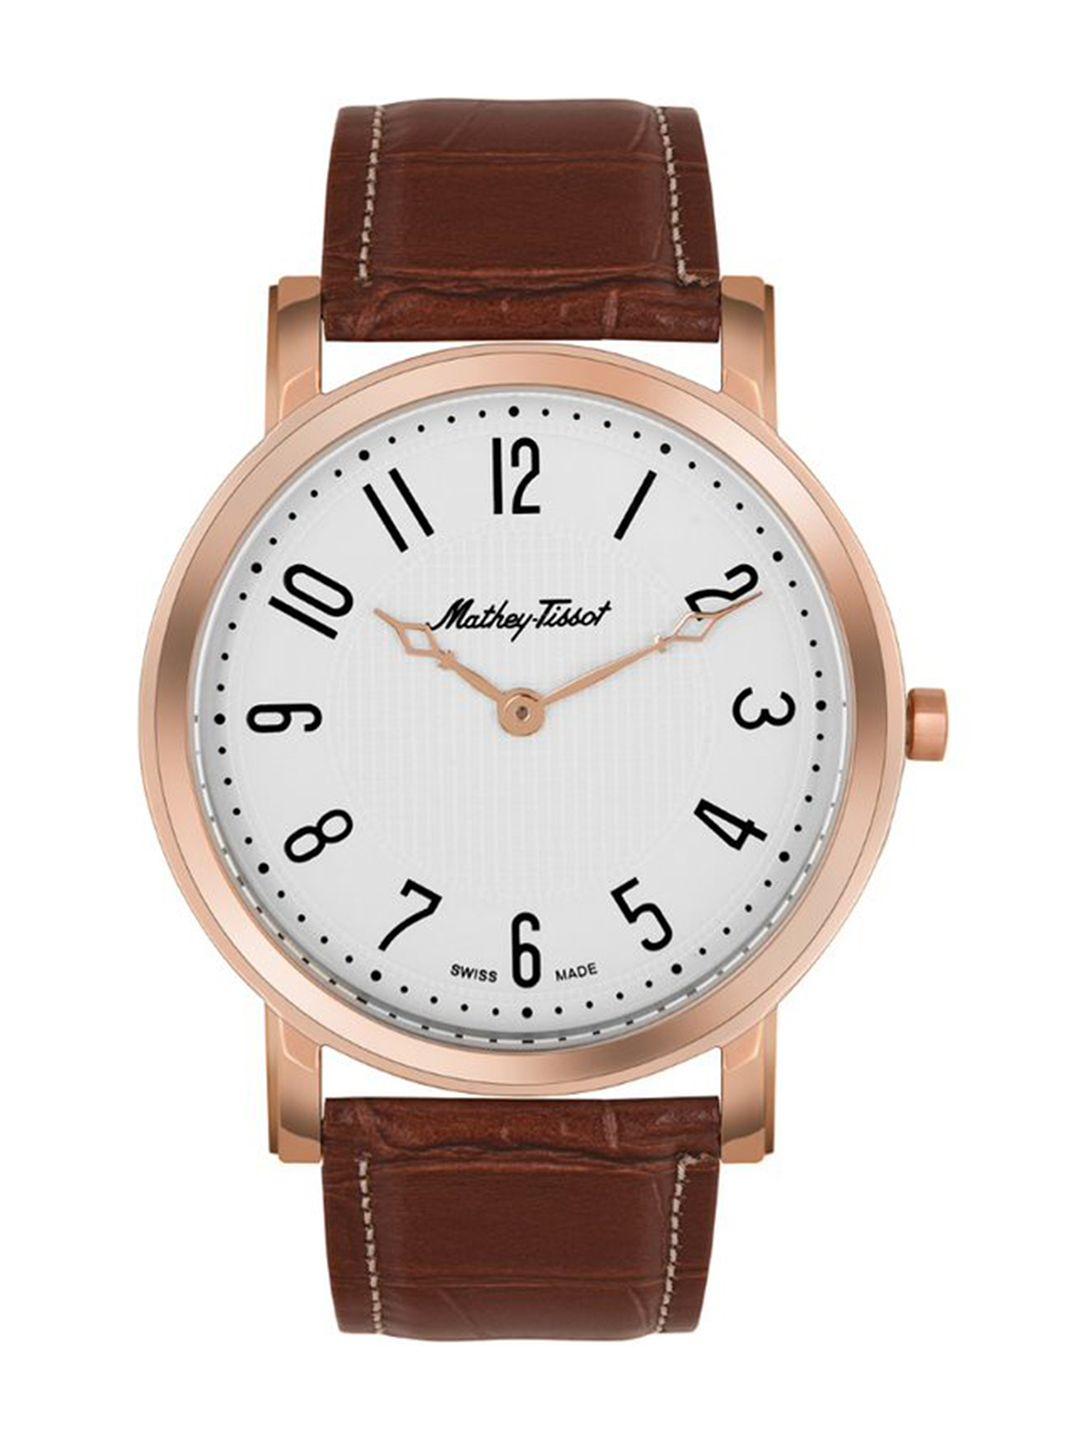 mathey-tissot-men-white-brass-embellished-dial-&-brown-leather-straps-analogue-watch-hb611251spg